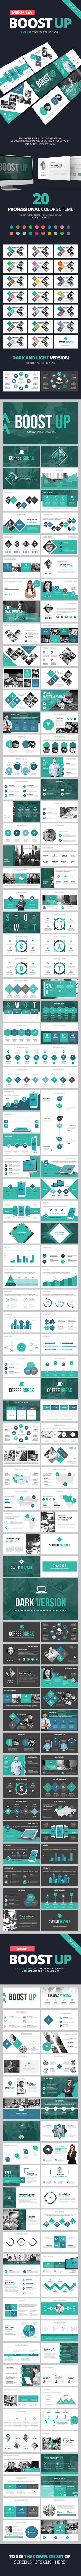 Boost Up – Business Powerpoint Template